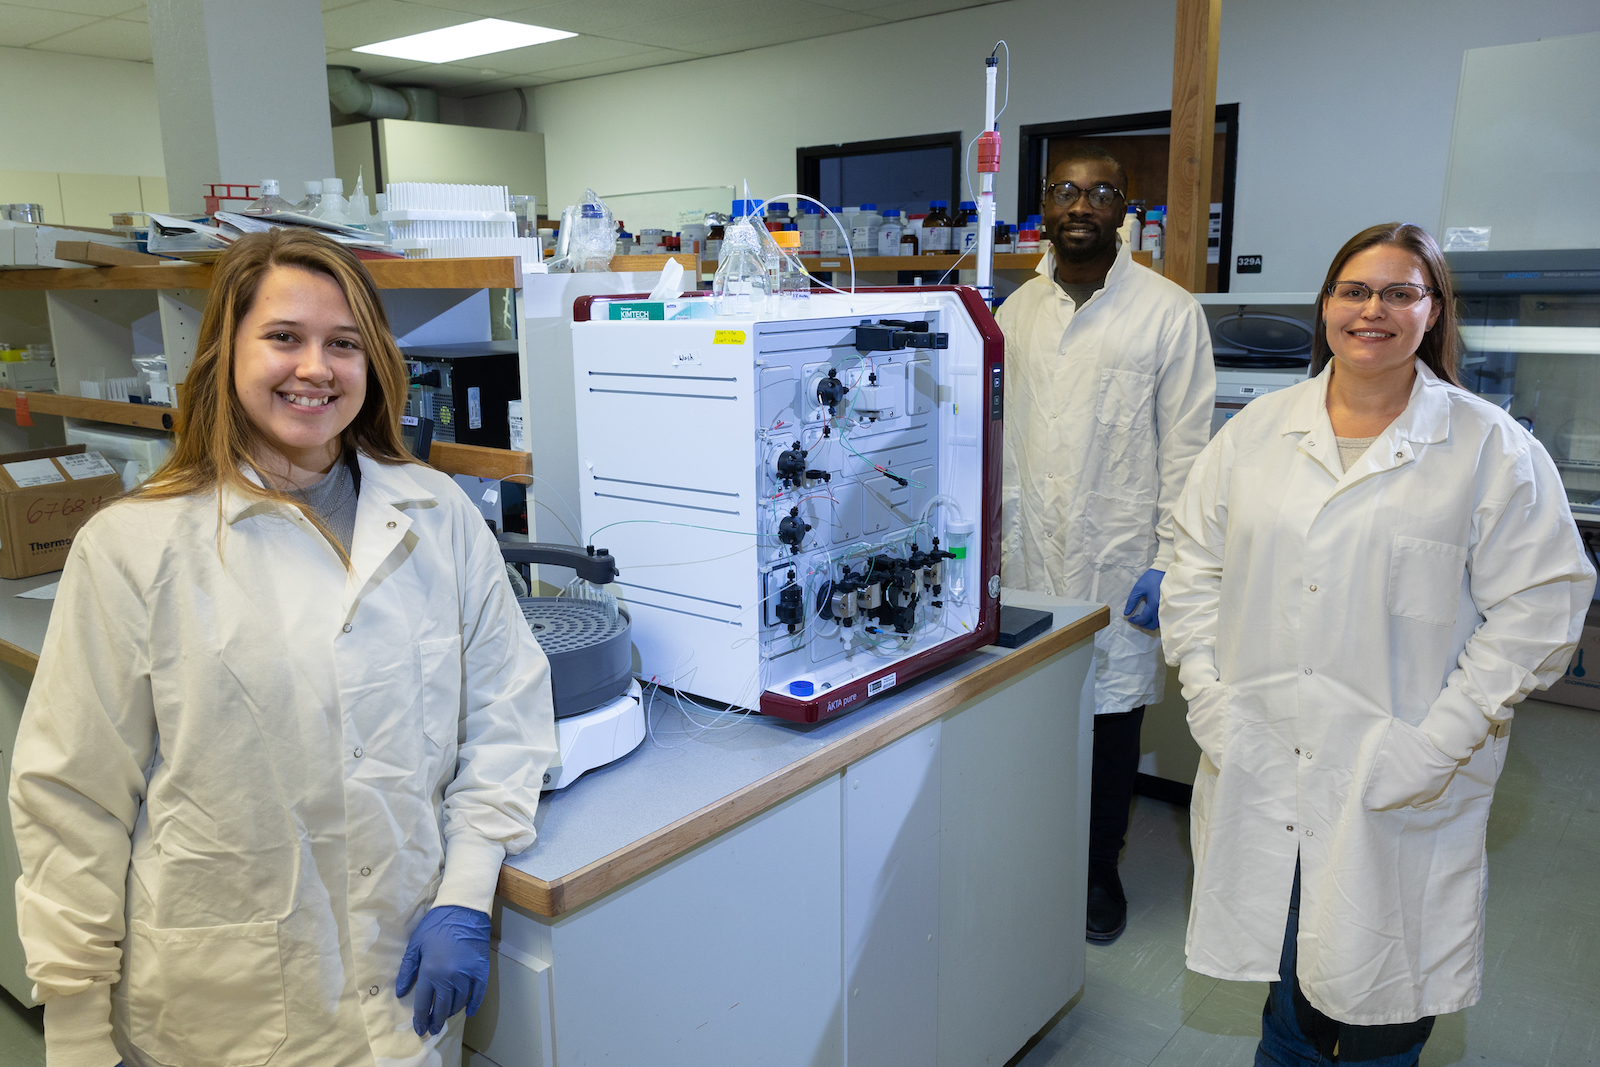 Crystal Lovato, undergraduate student, Reuben Opoku, master’s student, and Julia Martin, associate professor in Idaho State University’s Department of Biological Sciences, pose for a photo in a lab on ISU’s Pocatello campus.